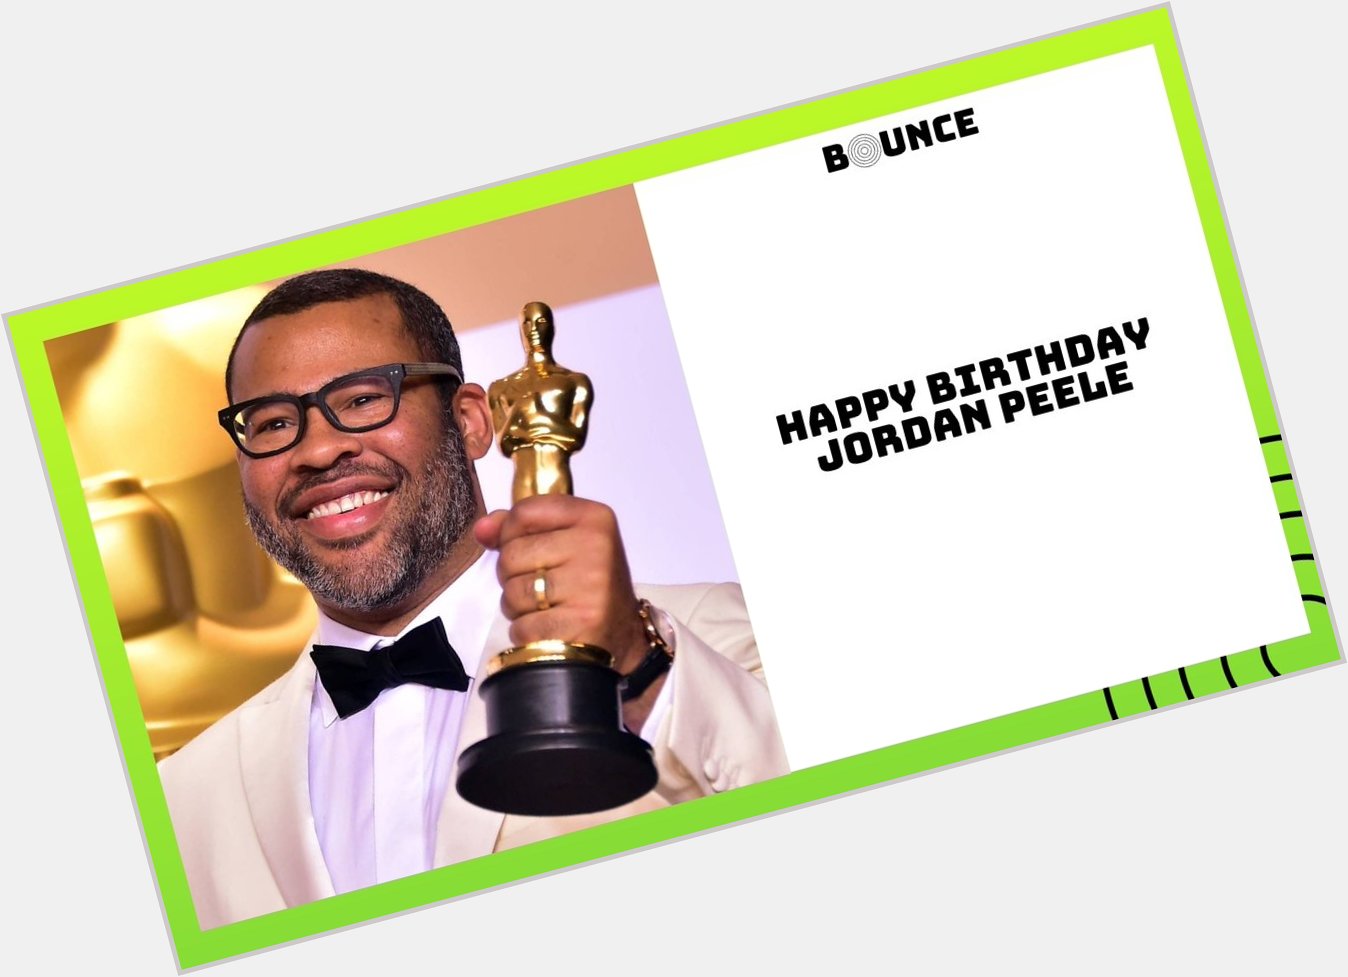 Happy Birthday to everyone s favorite Director and the creator of Get Out and US, Jordan Peele!  